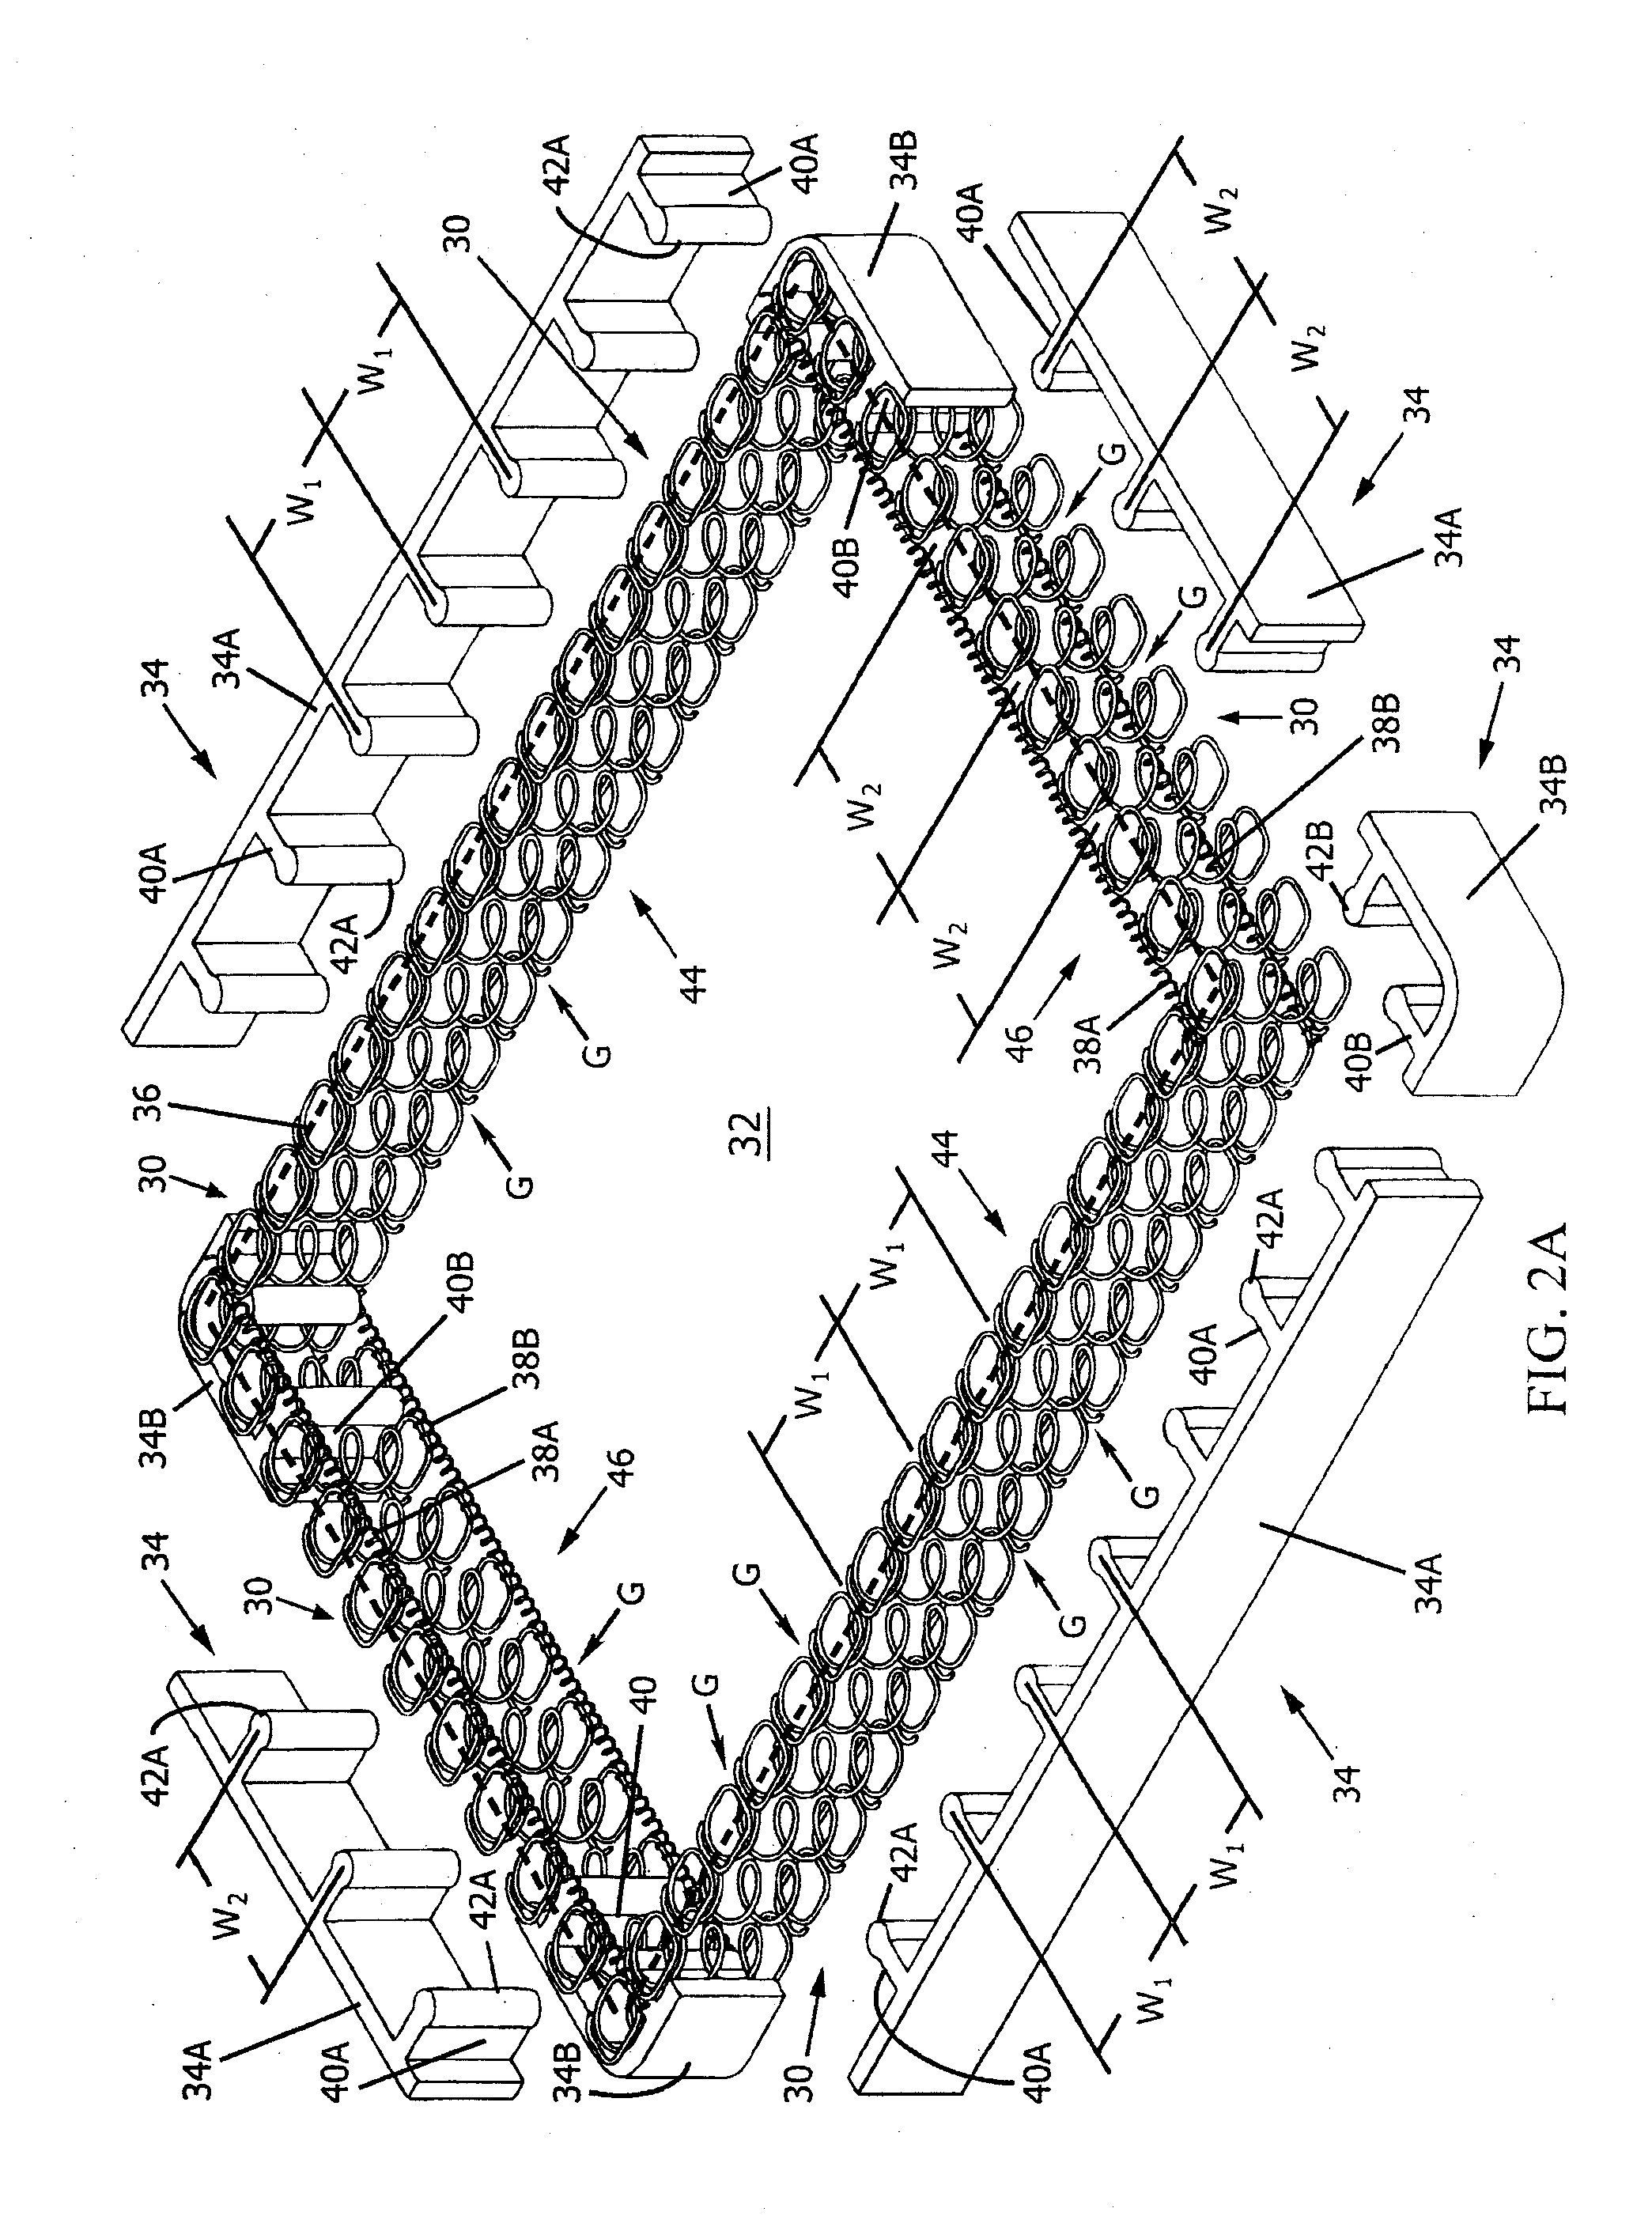 Expandable edge-support members, assemblies, and related methods, suitable for bedding and seating applications and innersprings